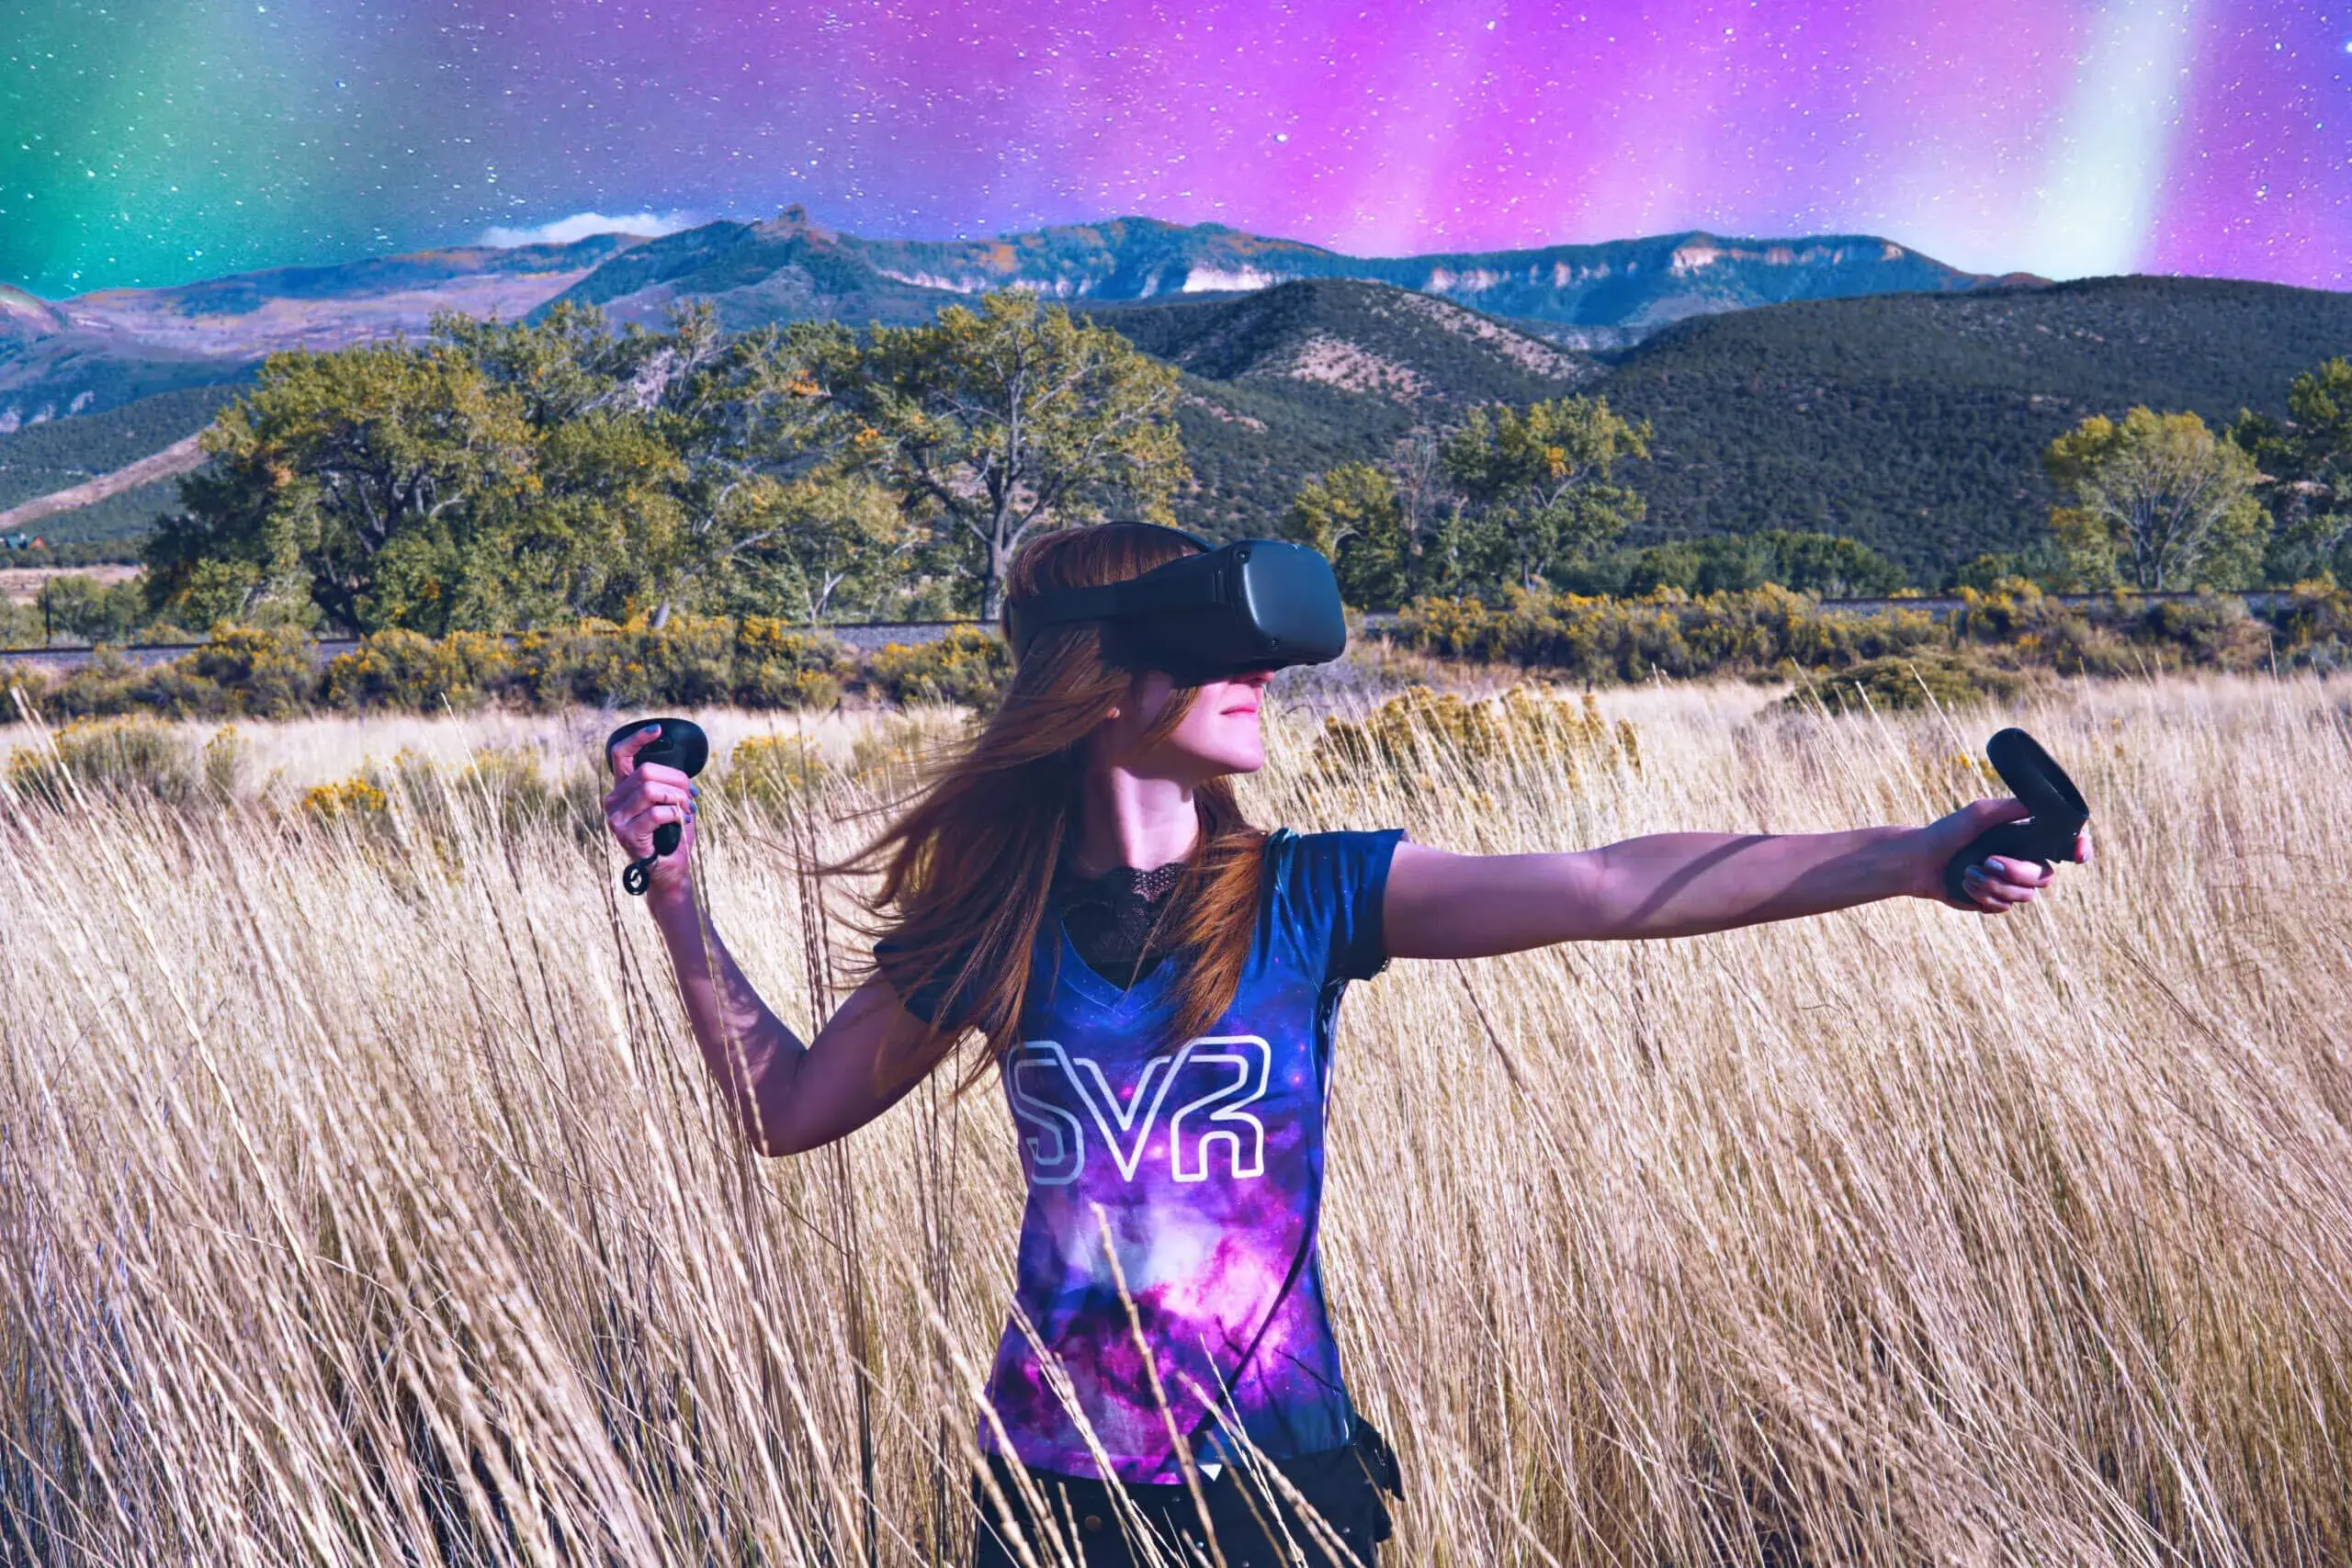 woman wearing Oculus headset and controllers in the middle of tall grasses